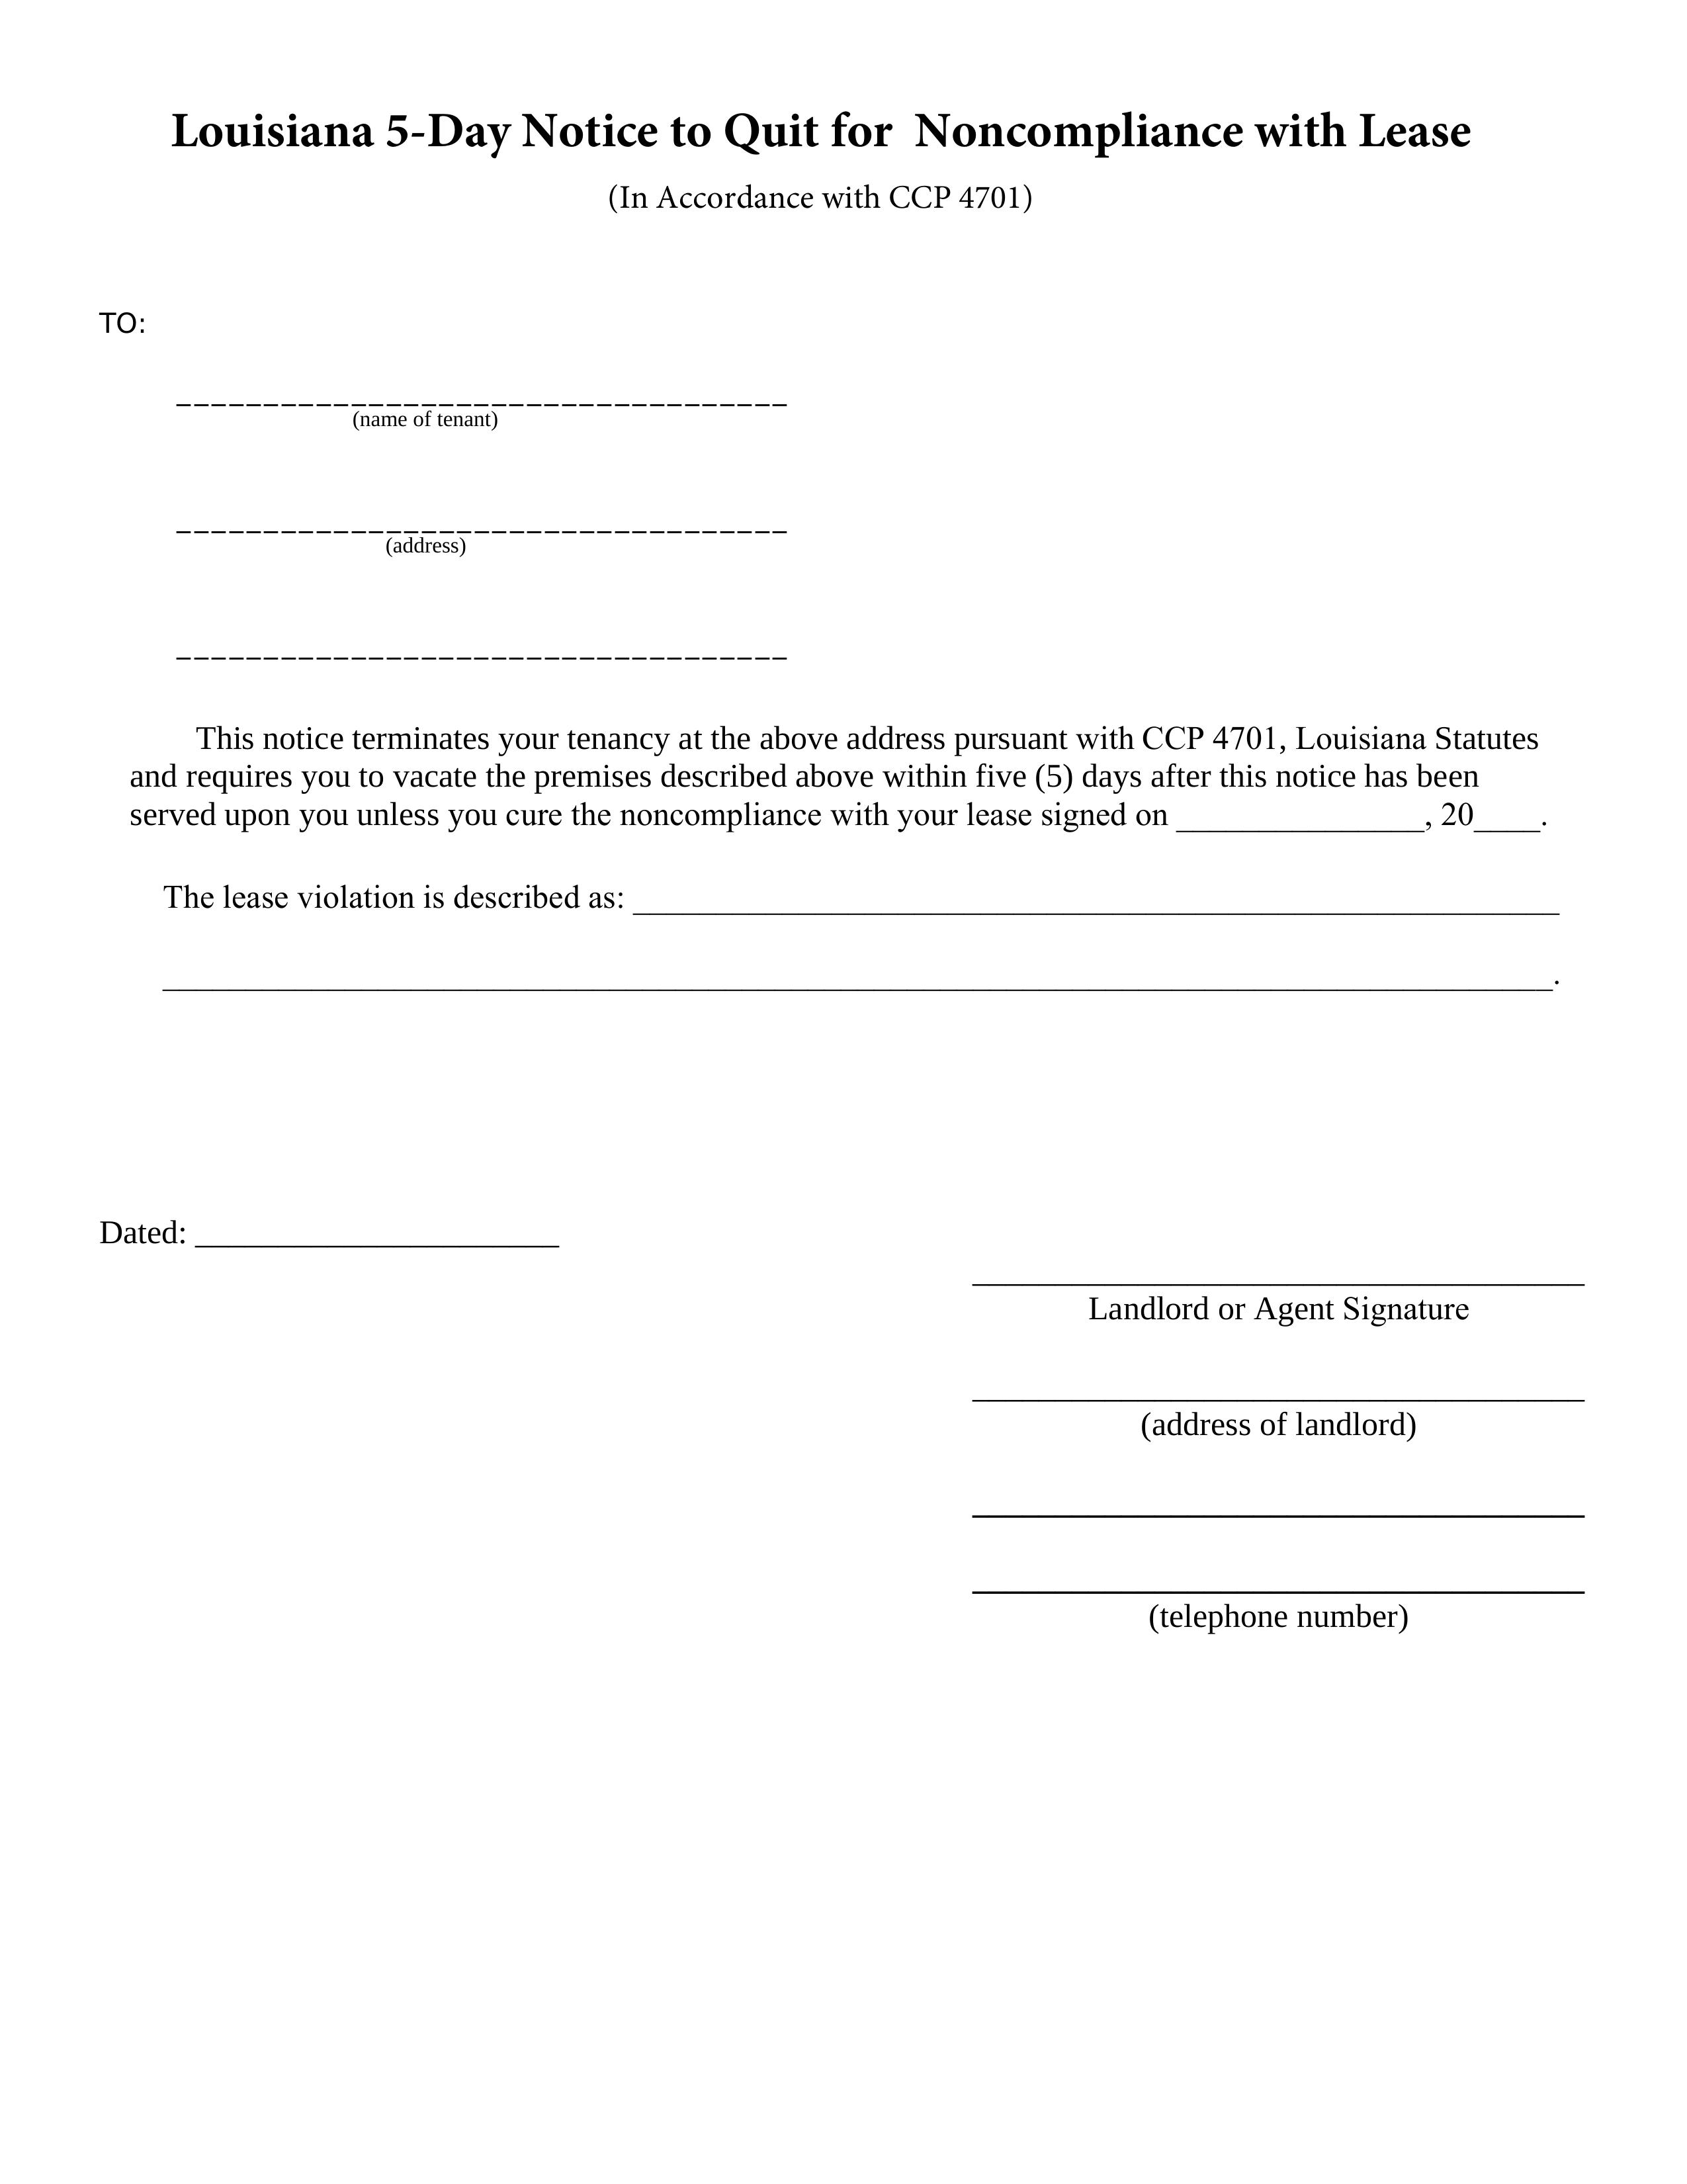 Louisiana 5Day Notice to Quit Form eForms